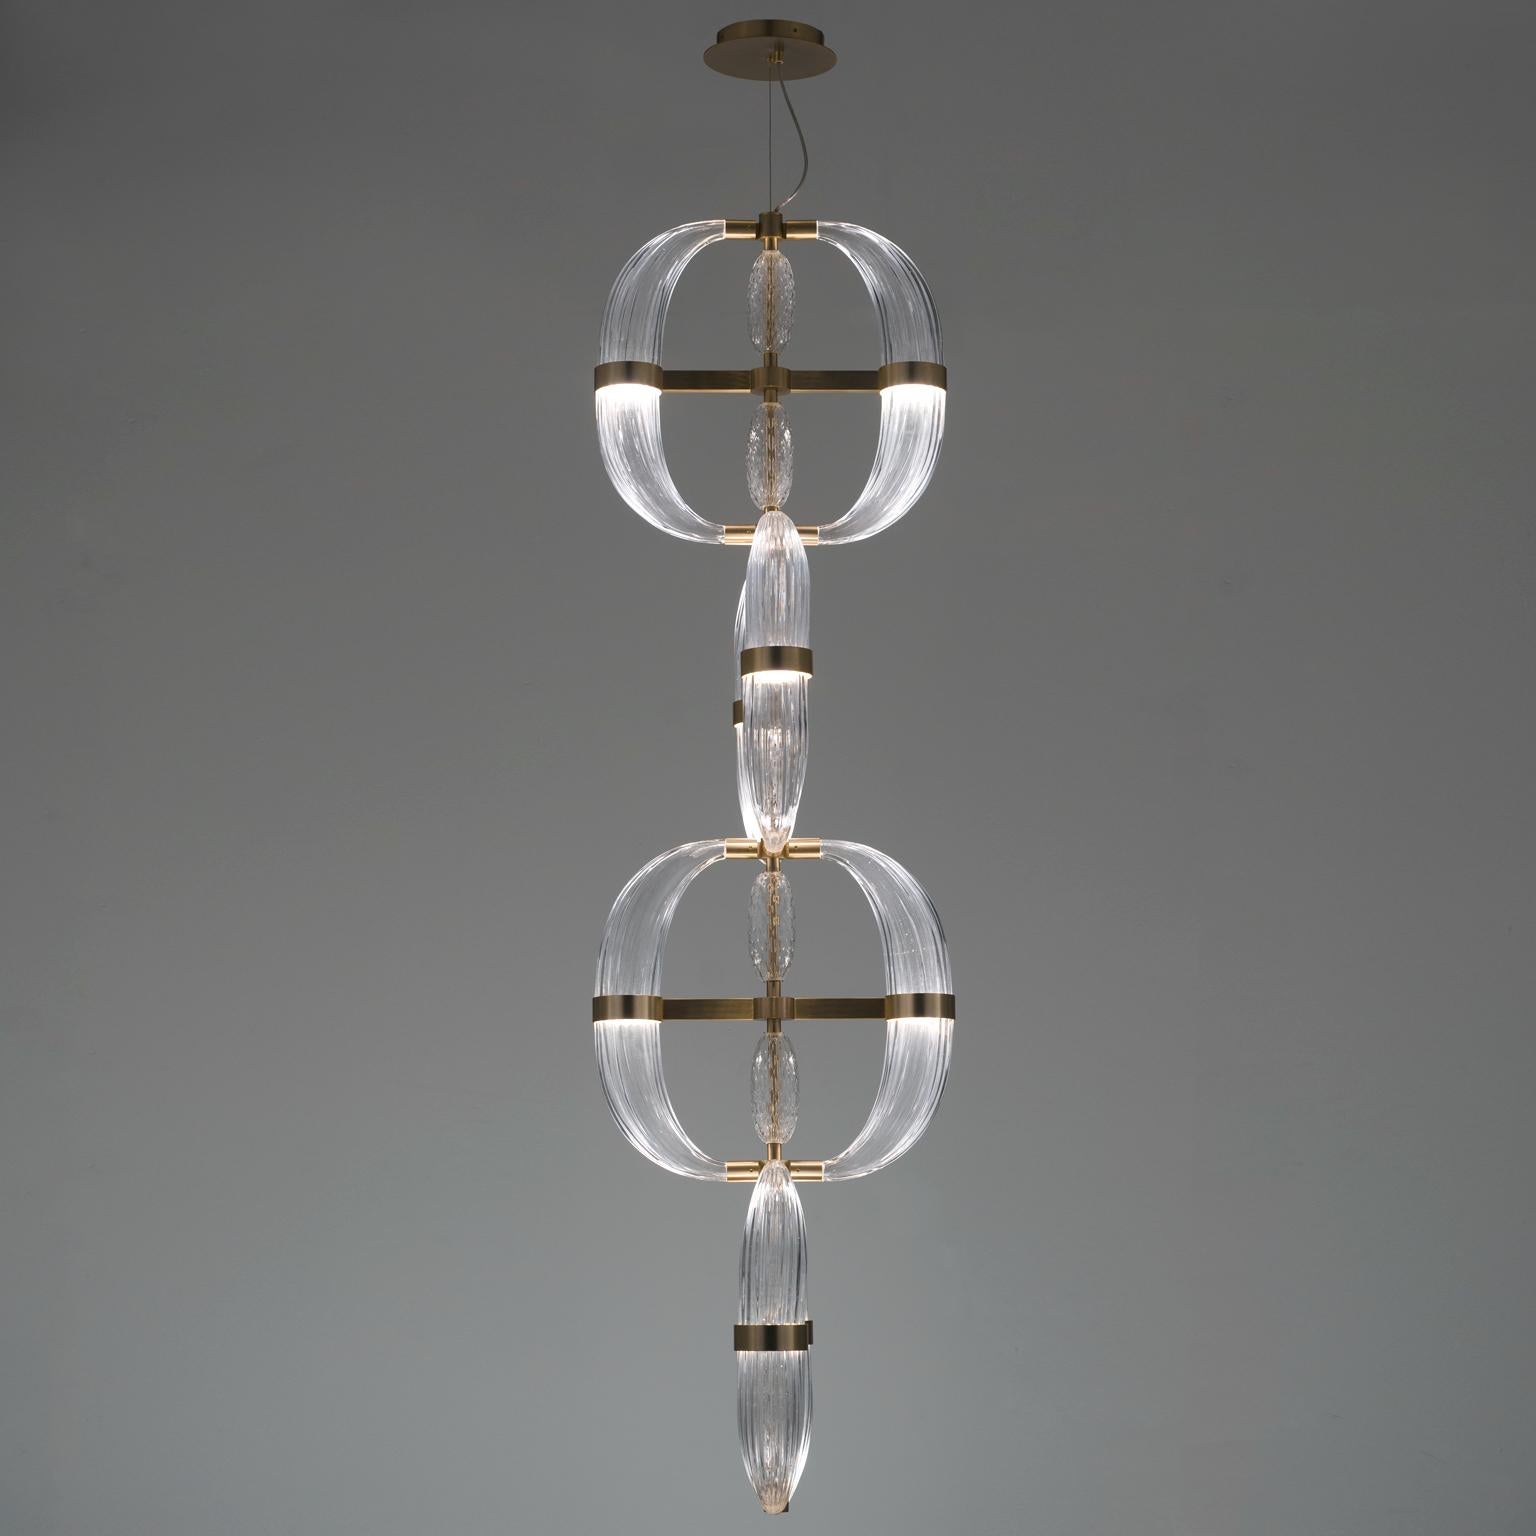 Love at first sight between glass and metal. A light cascade suited for a vertical or horizontal development, according to the needs. One, two or many elements. The imperfect, organic and sinuous lines of the hand blown glass are contrasted by a